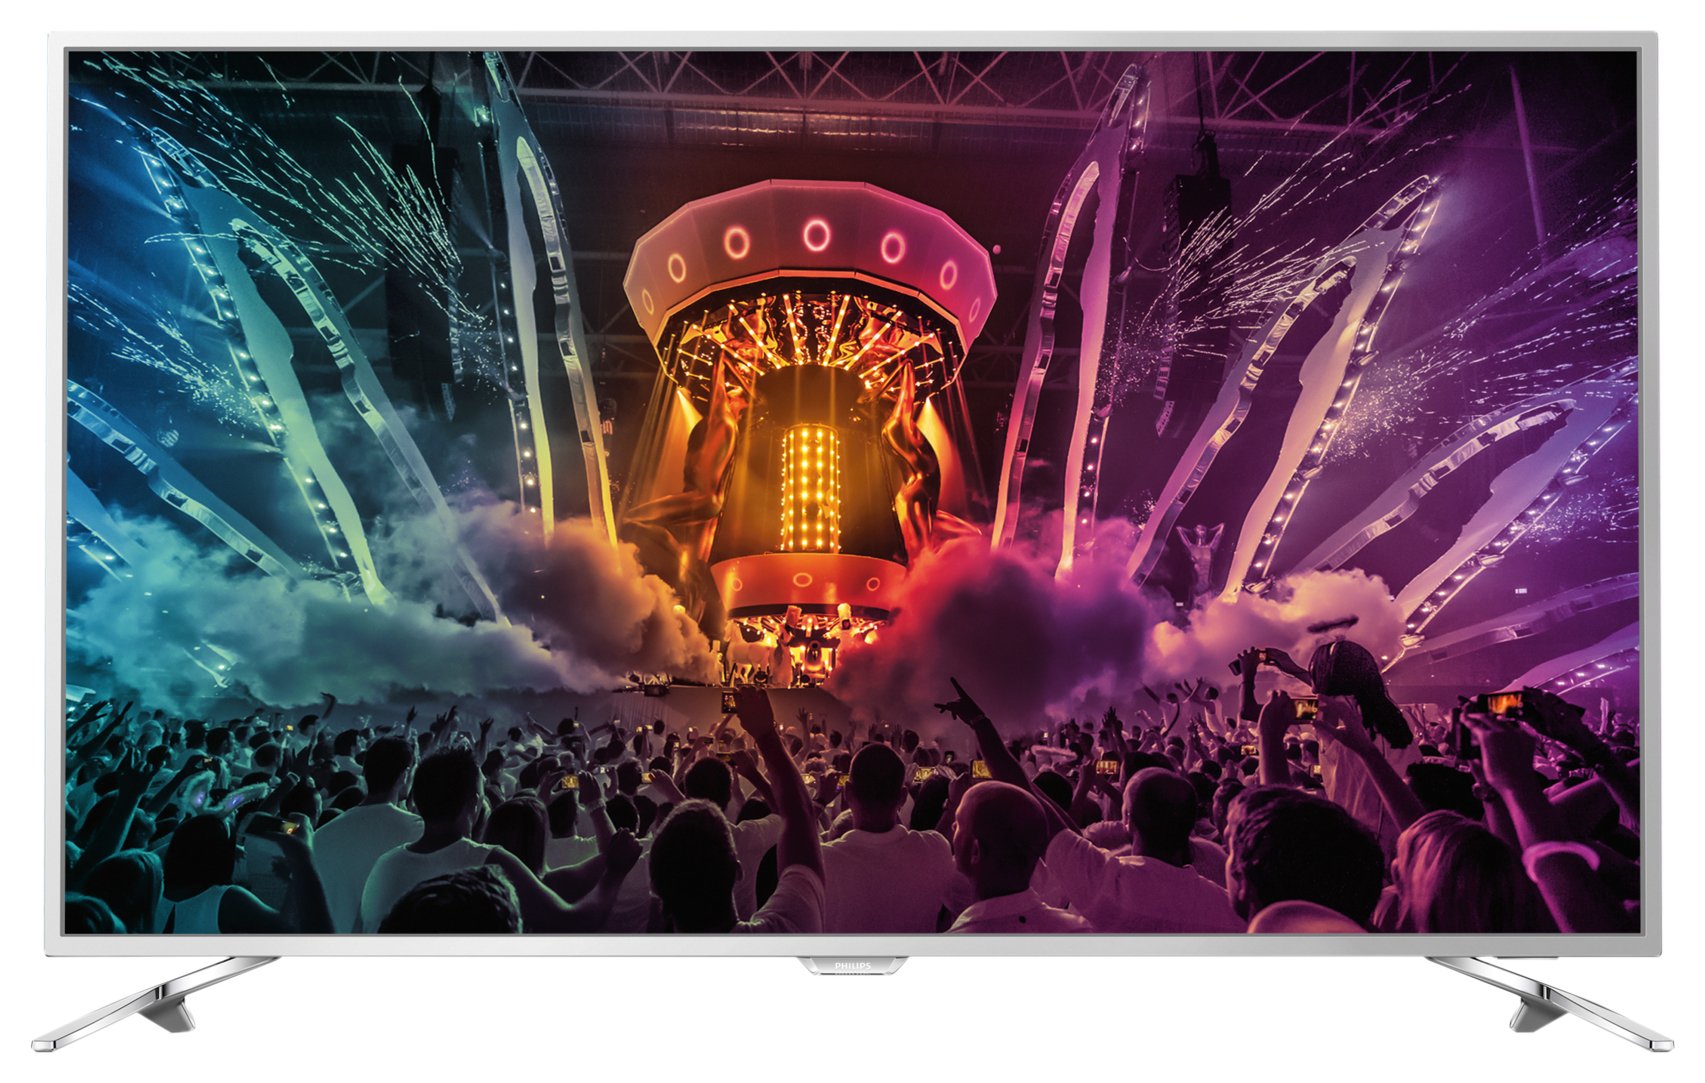 Philips - 65 Inch - 65PUS6521 - 4K Ultra HD Ambilight-3 - Smart TV. Review